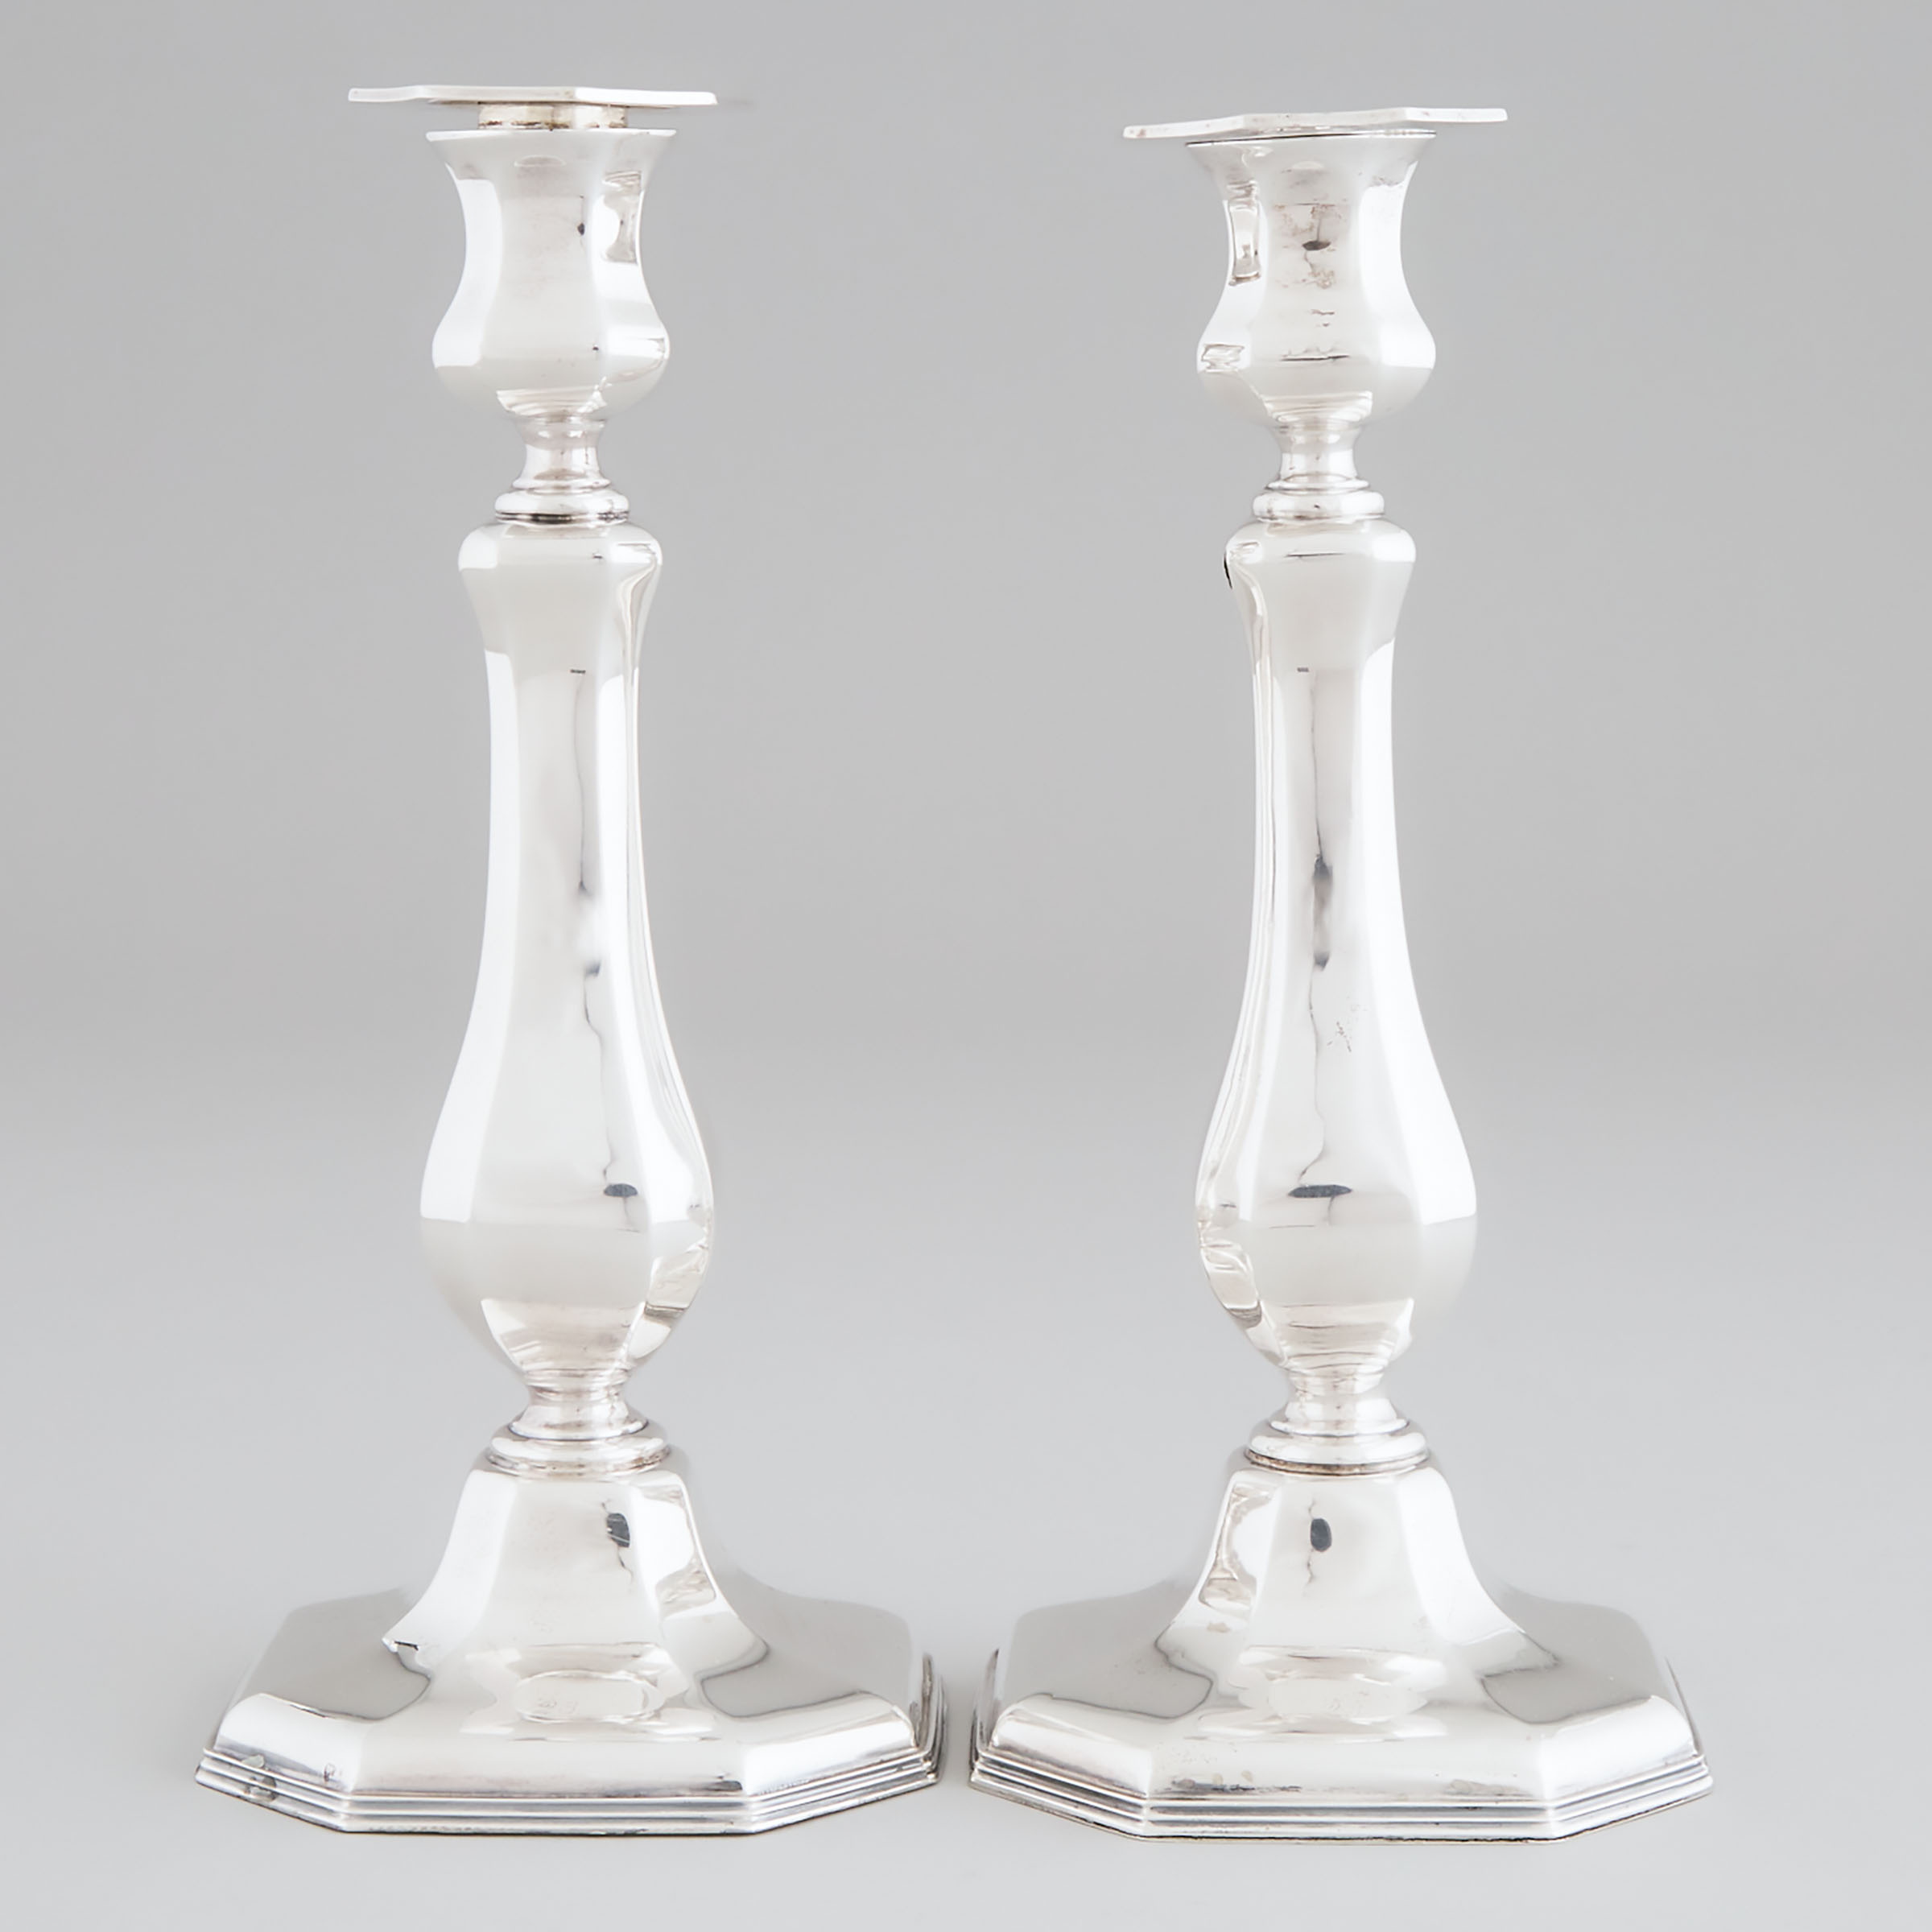 Pair of American Silver Table Candlesticks, Reed & Barton, Taunton, Mass., early 20th century